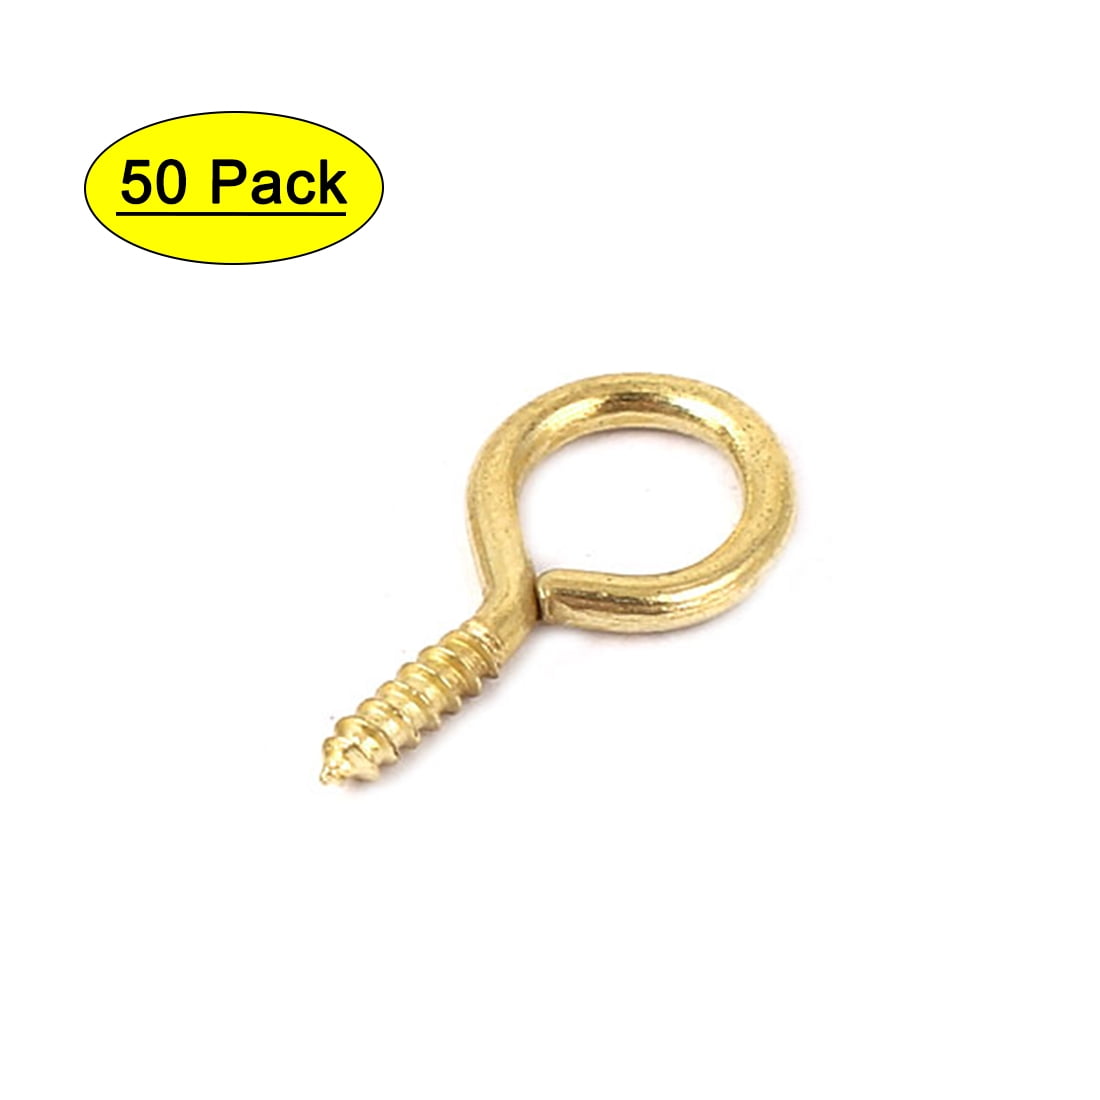 SCREW EYES BRASS PLATED 14mm x 1 PICTURE FRAMING FRAME HANGING HOOKS CRAFT 100 